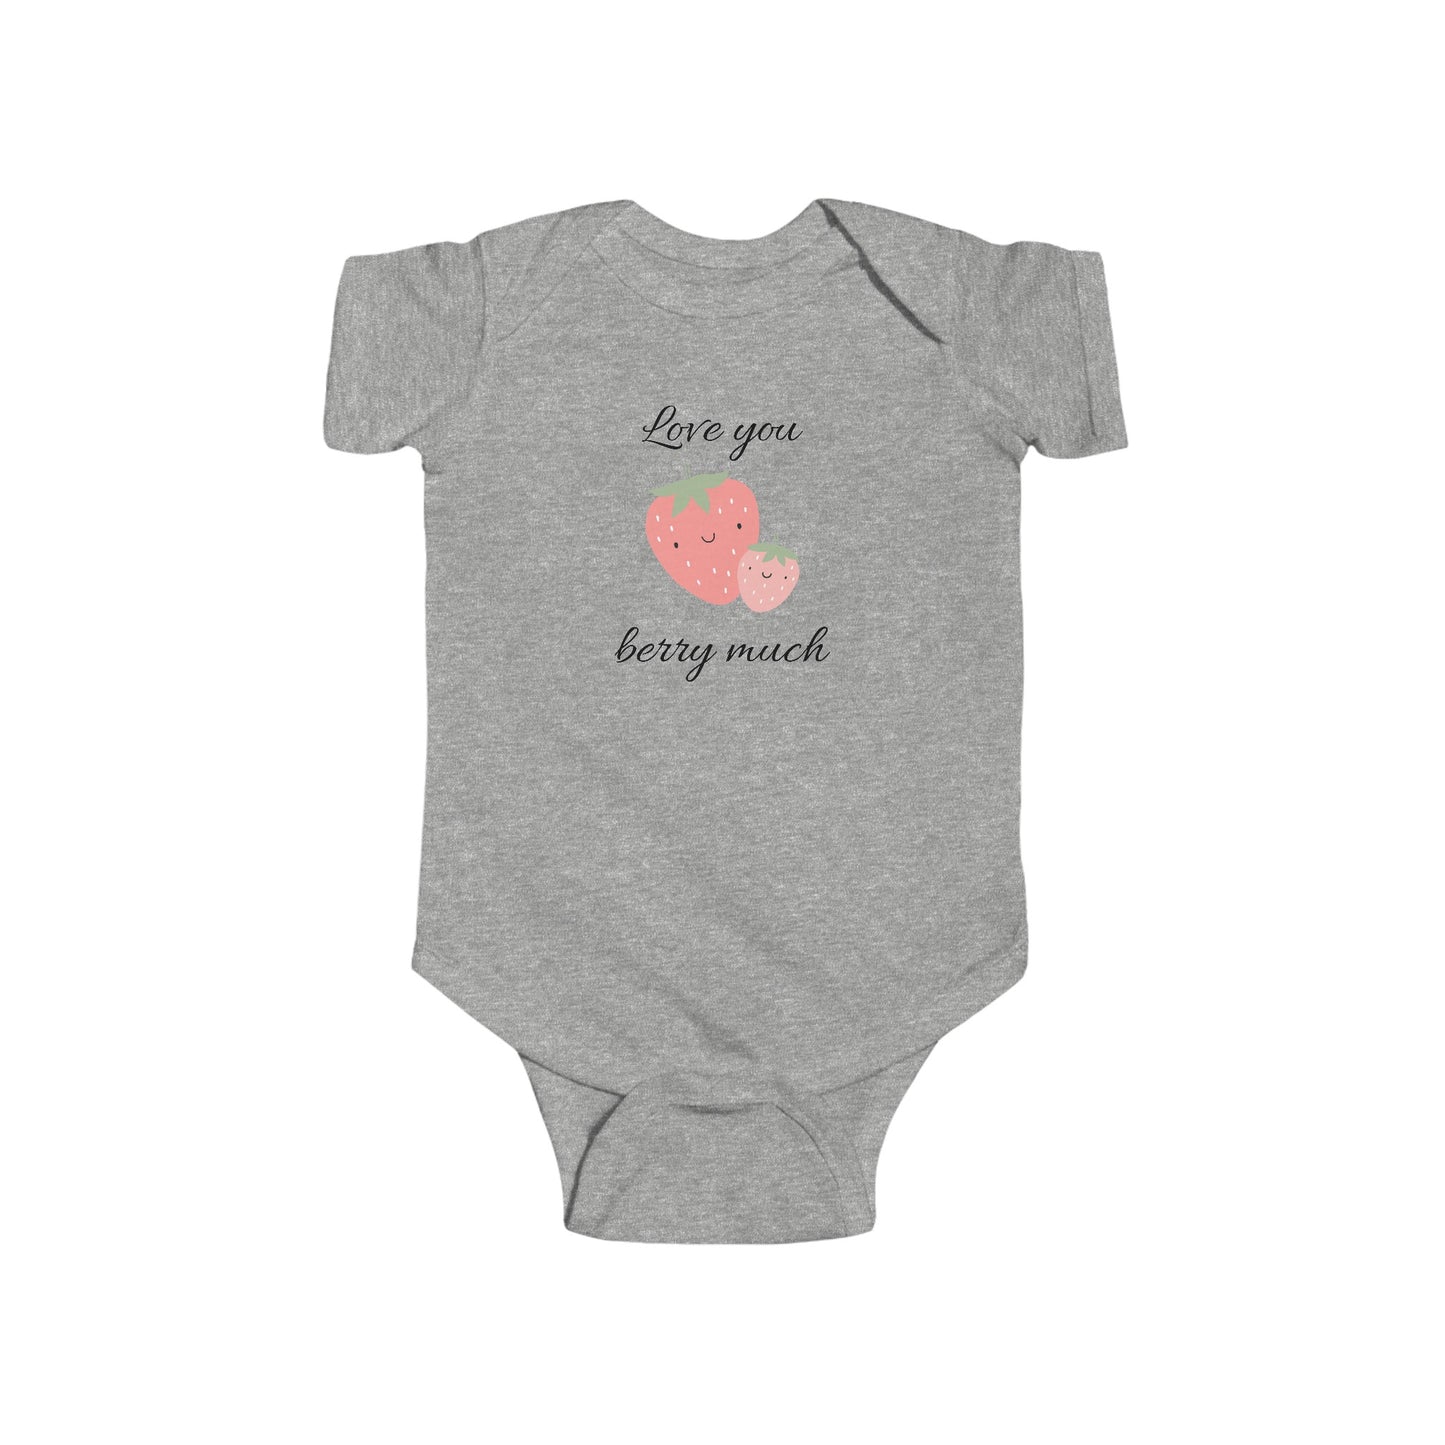 Love you berry much, Baby Bodysuit